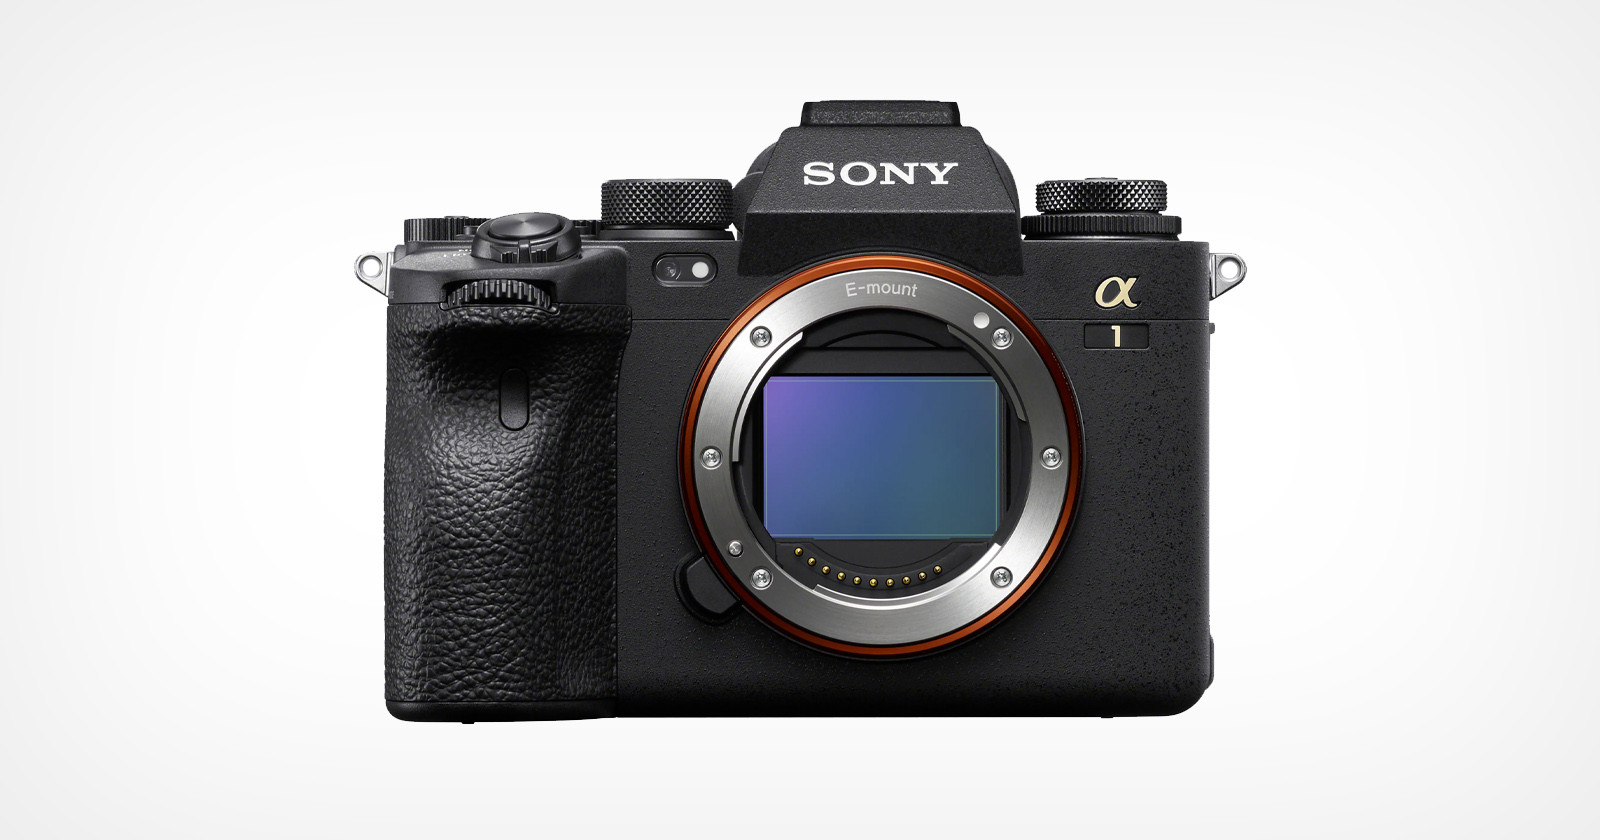 Sony Updates Alpha 1 with 8K 4:2:2 10-bit Recording and Lossless RAW